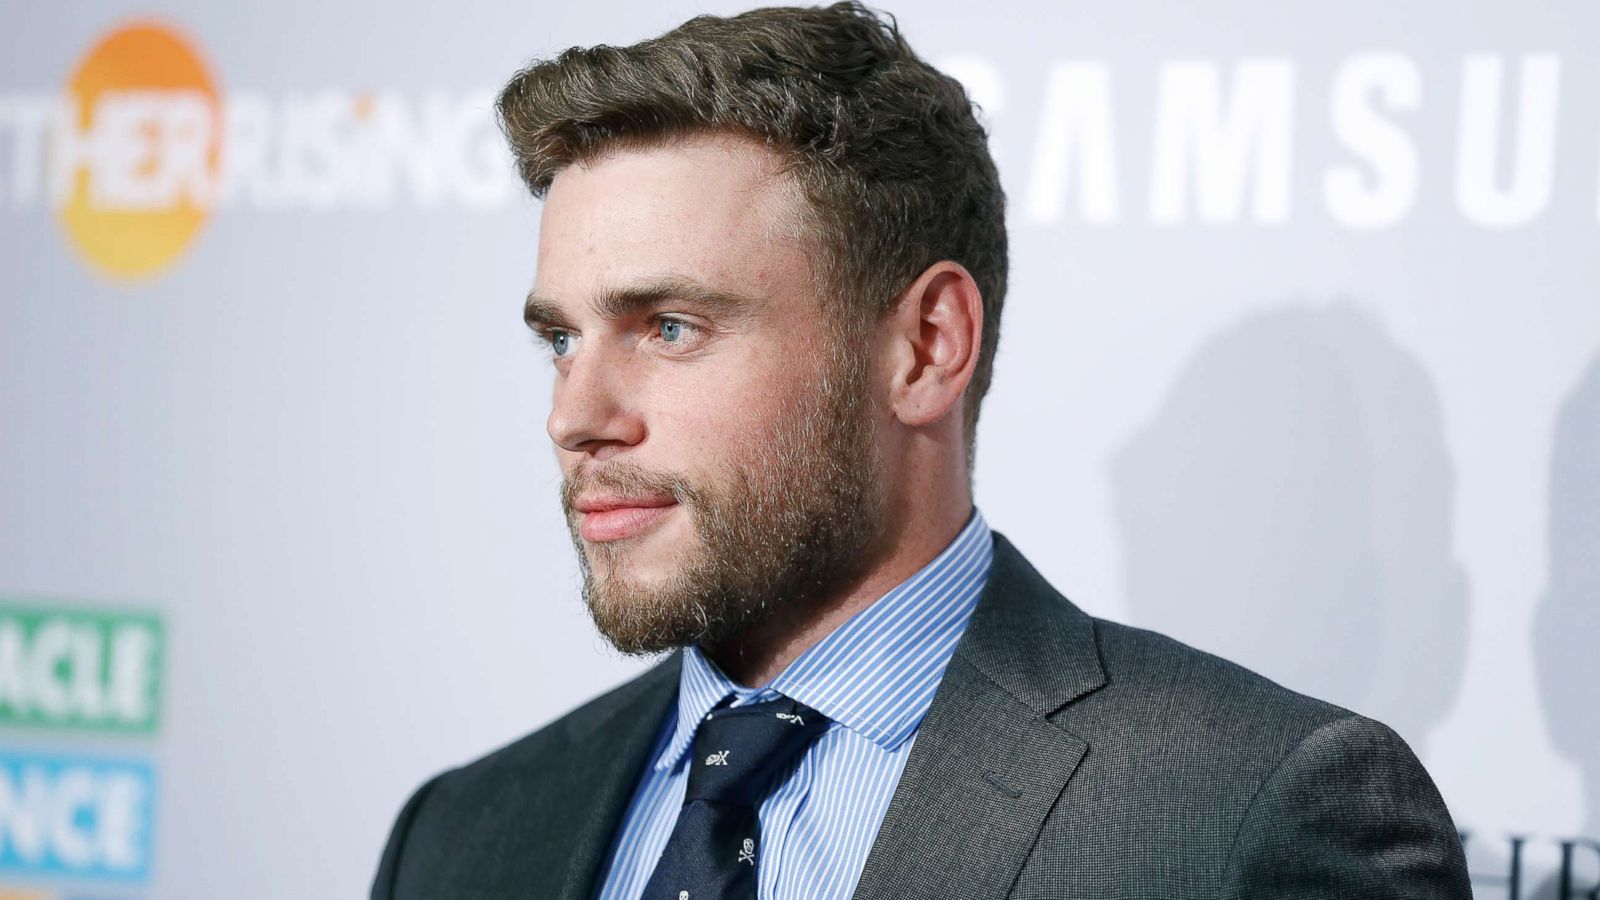 VIDEO: Gus Kenworthy Bears All In Recent MeUndies Ad - Unofficial Networks